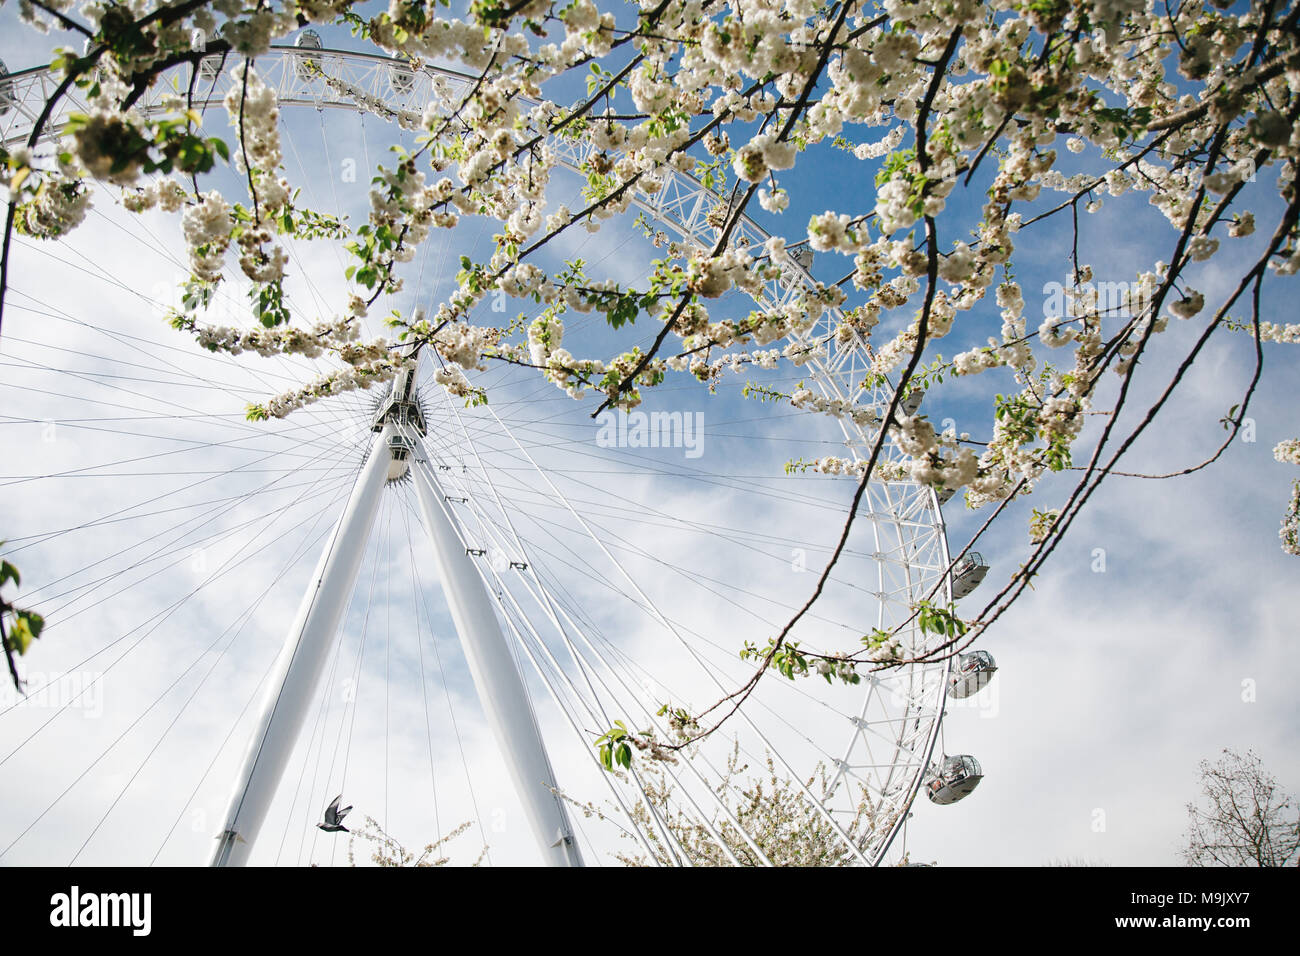 London Eye with flowers Stock Photo